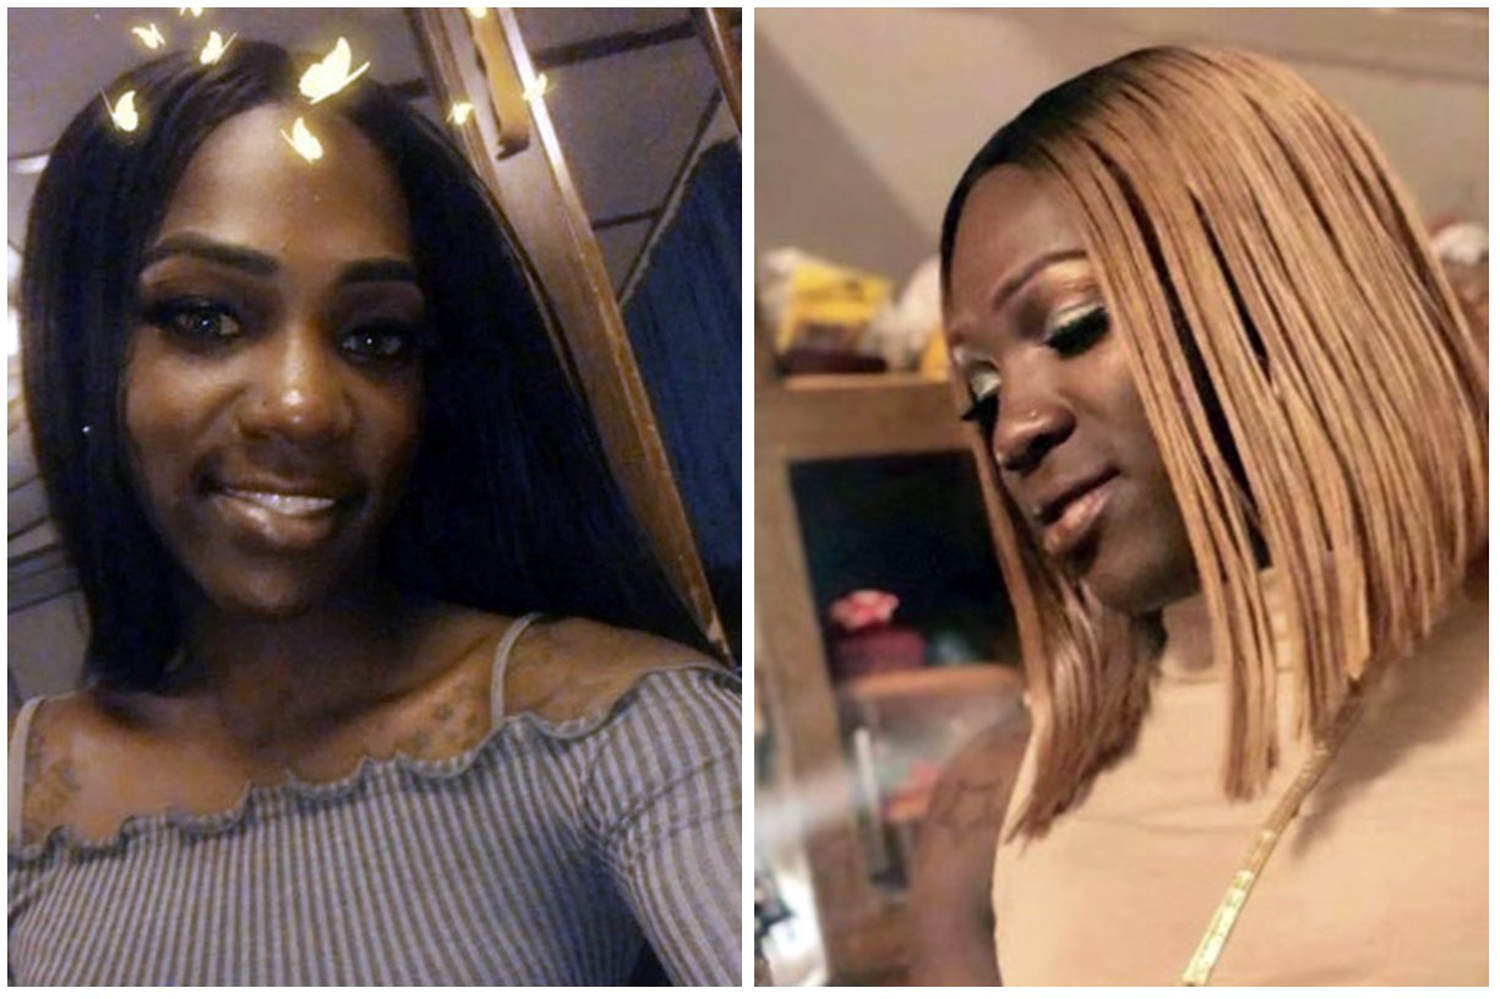 Man convicted in Black transgender woman's killing in first federal hate crime trial over gender identity